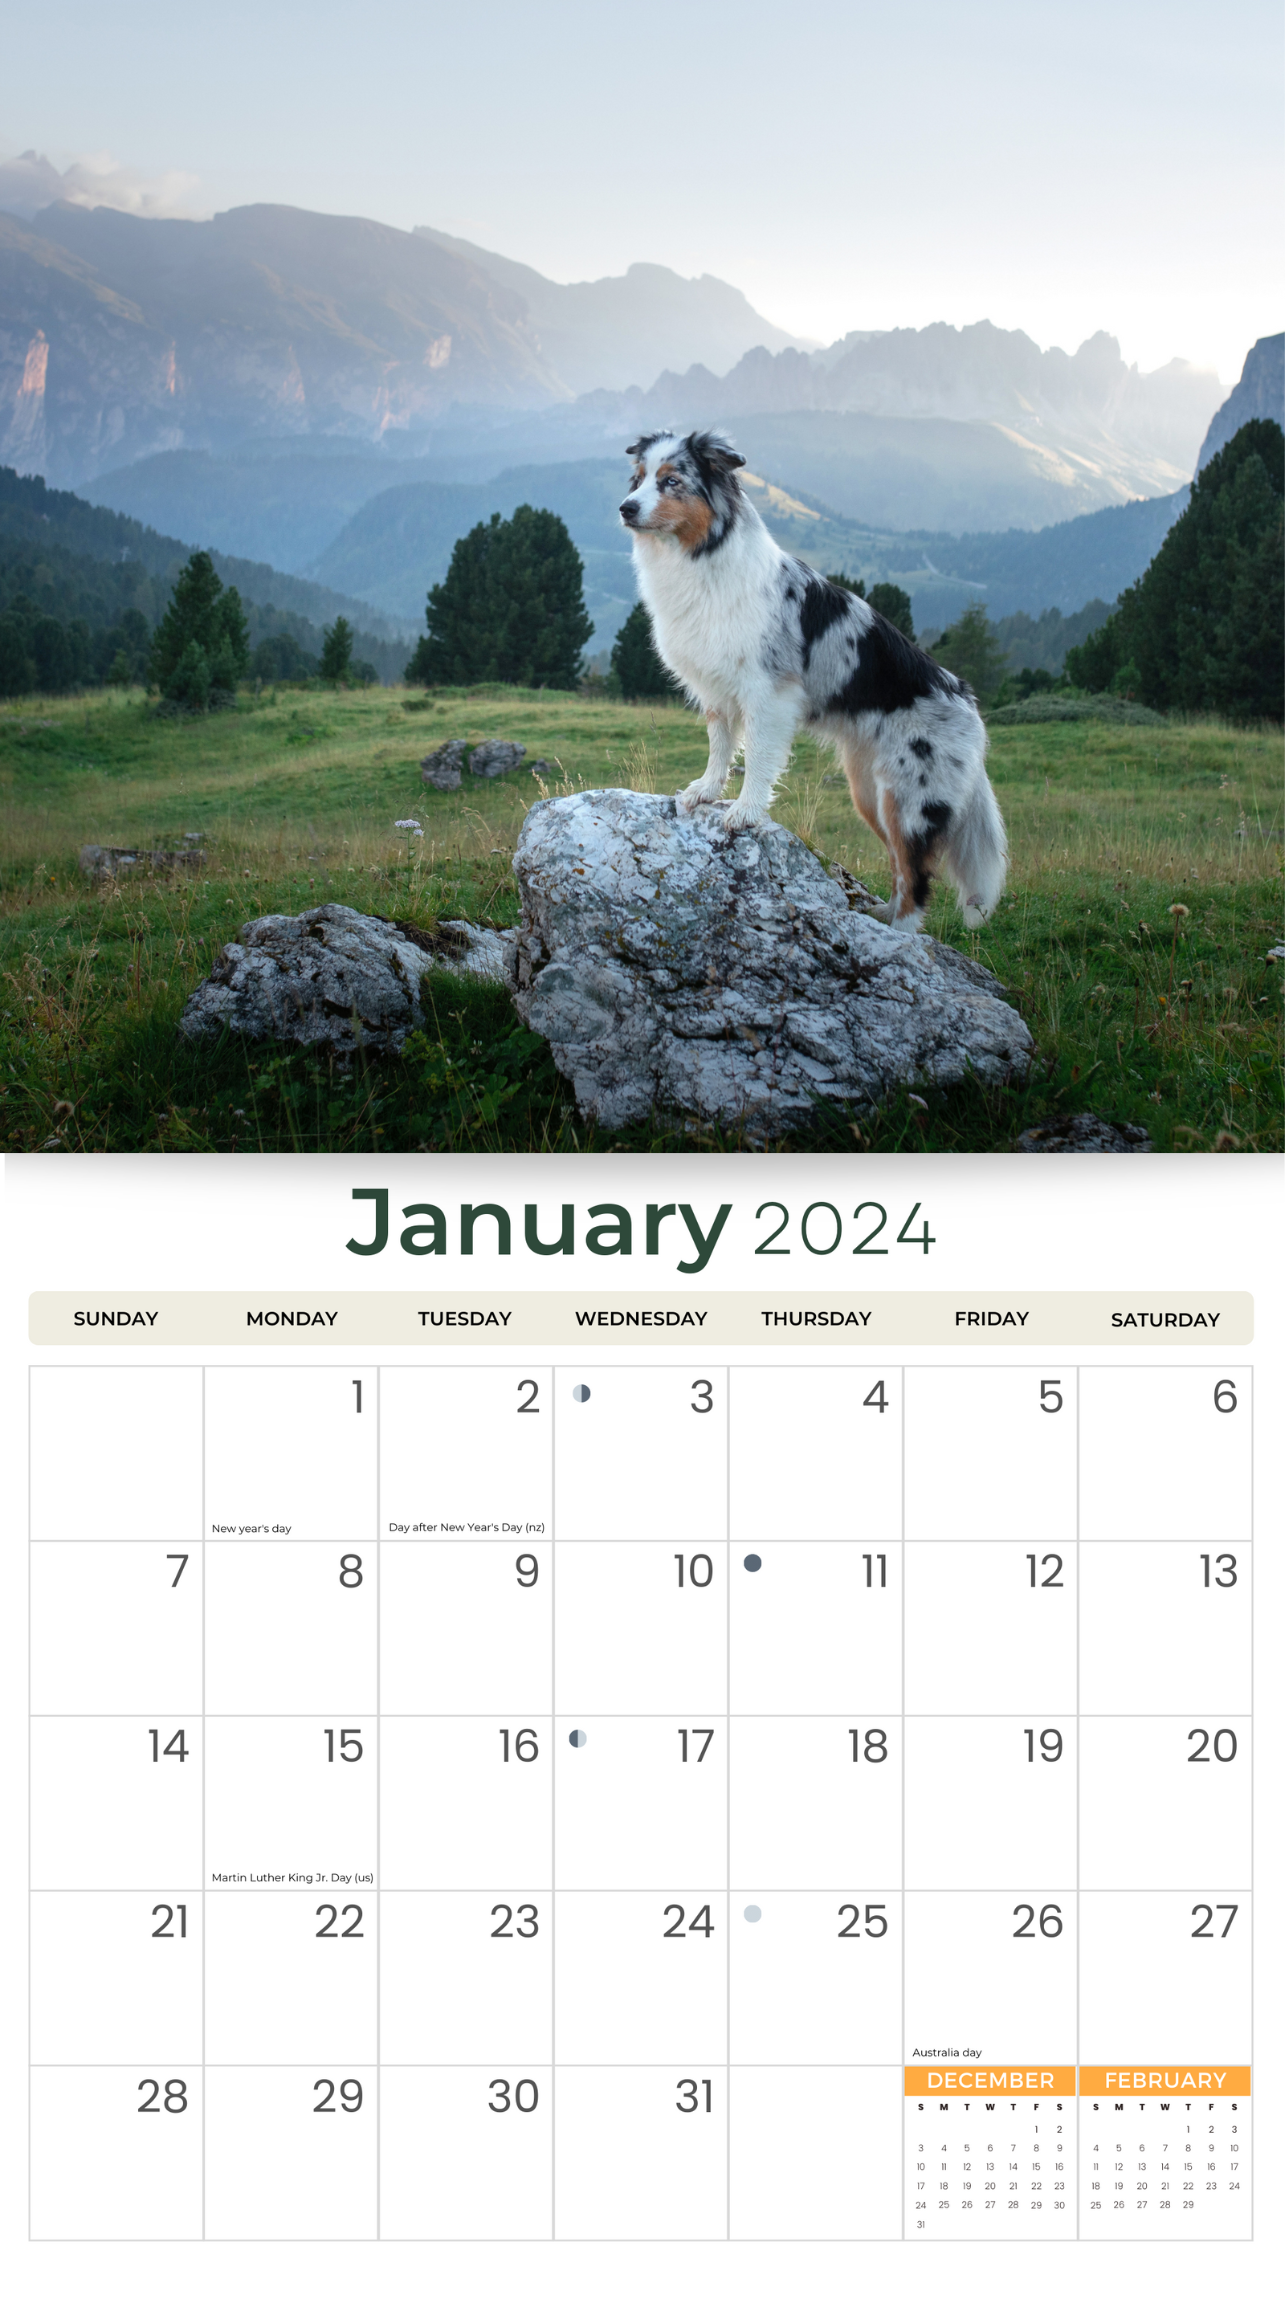 2024 Australian Shepherds Dogs & Puppies - Deluxe Wall Calendar by Just Calendars - 16 Month - Plastic Free